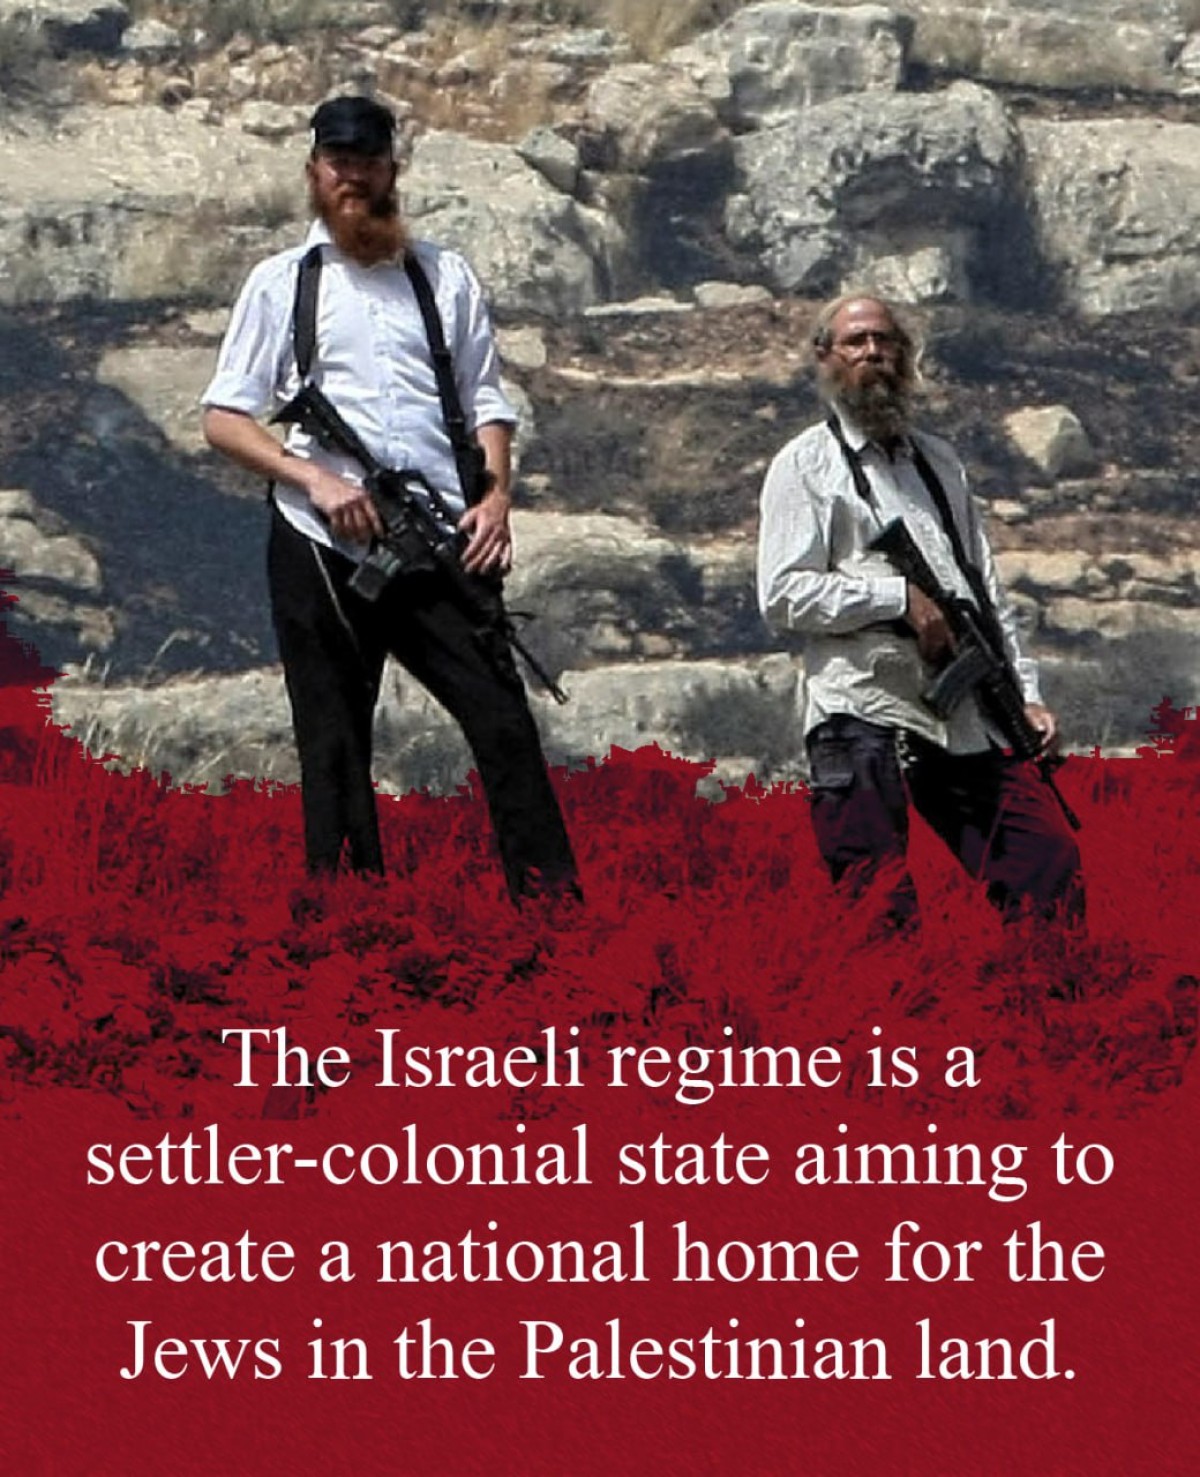 The Israeli regime is a settler-colonial state aiming to create a national home for the Jews in the Palestinian land